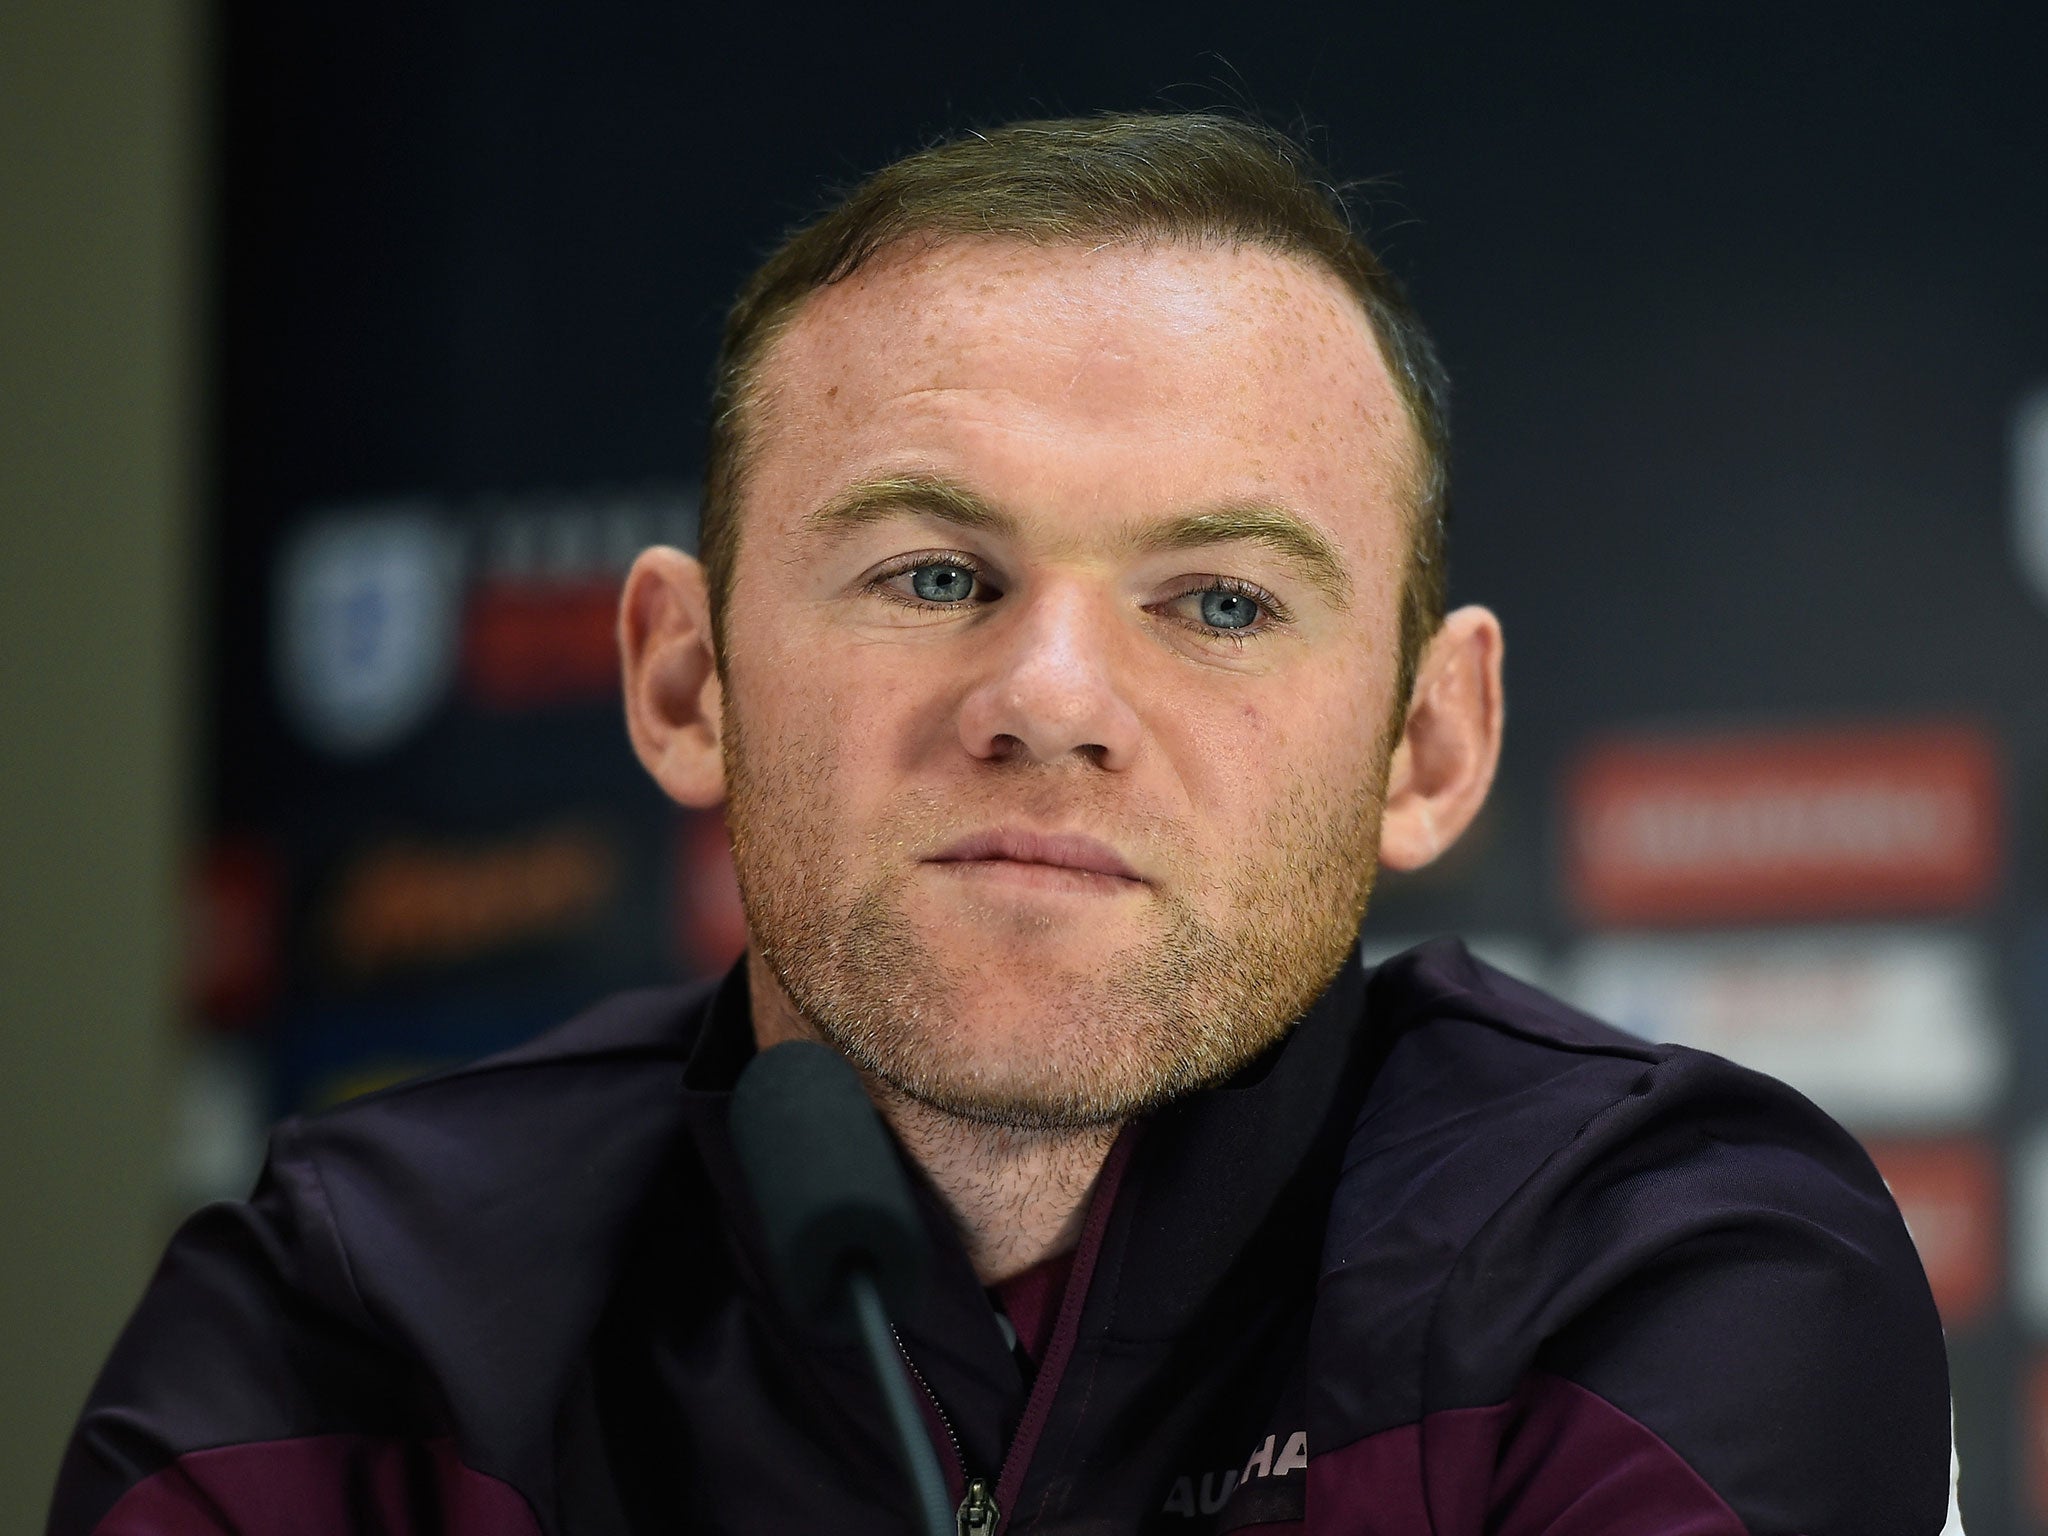 England and Manchester United captain Wayne Rooney